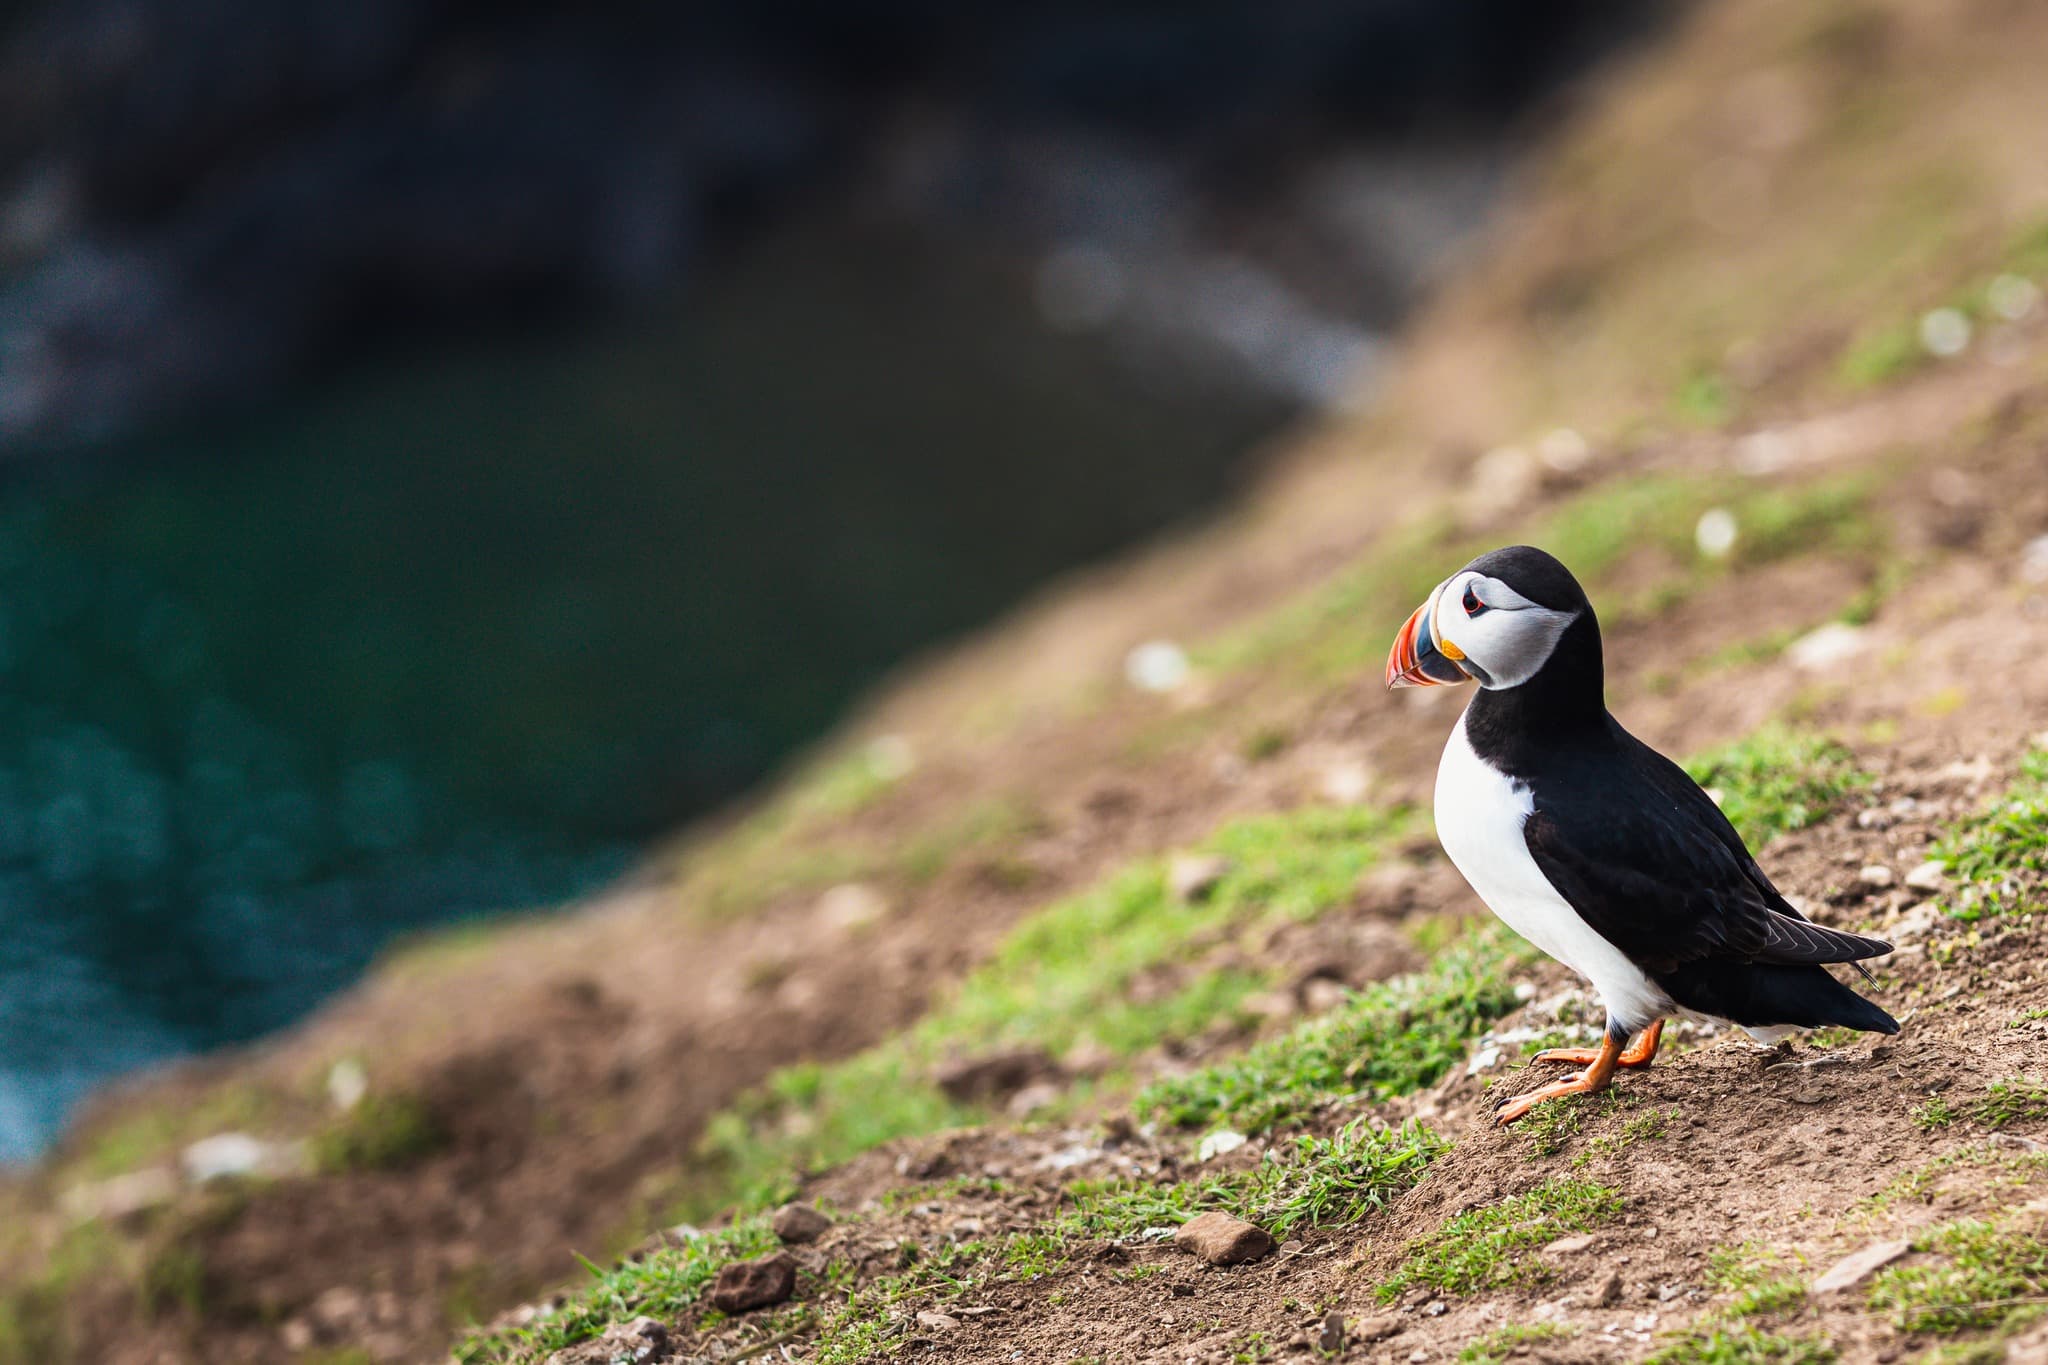 We 💙 our neighbours at Bluestone and are lucky enough to have Puffins nearby! 😃

Skomer Island, less than an hour’s drive and a 20-minute boat ride away, is a must-visit on your trip to the Pembrokeshire coast ⛵🦐

#MyBluestoneBreak #SkomerIsland #Puffins #SummerHoliday #SummerBreak